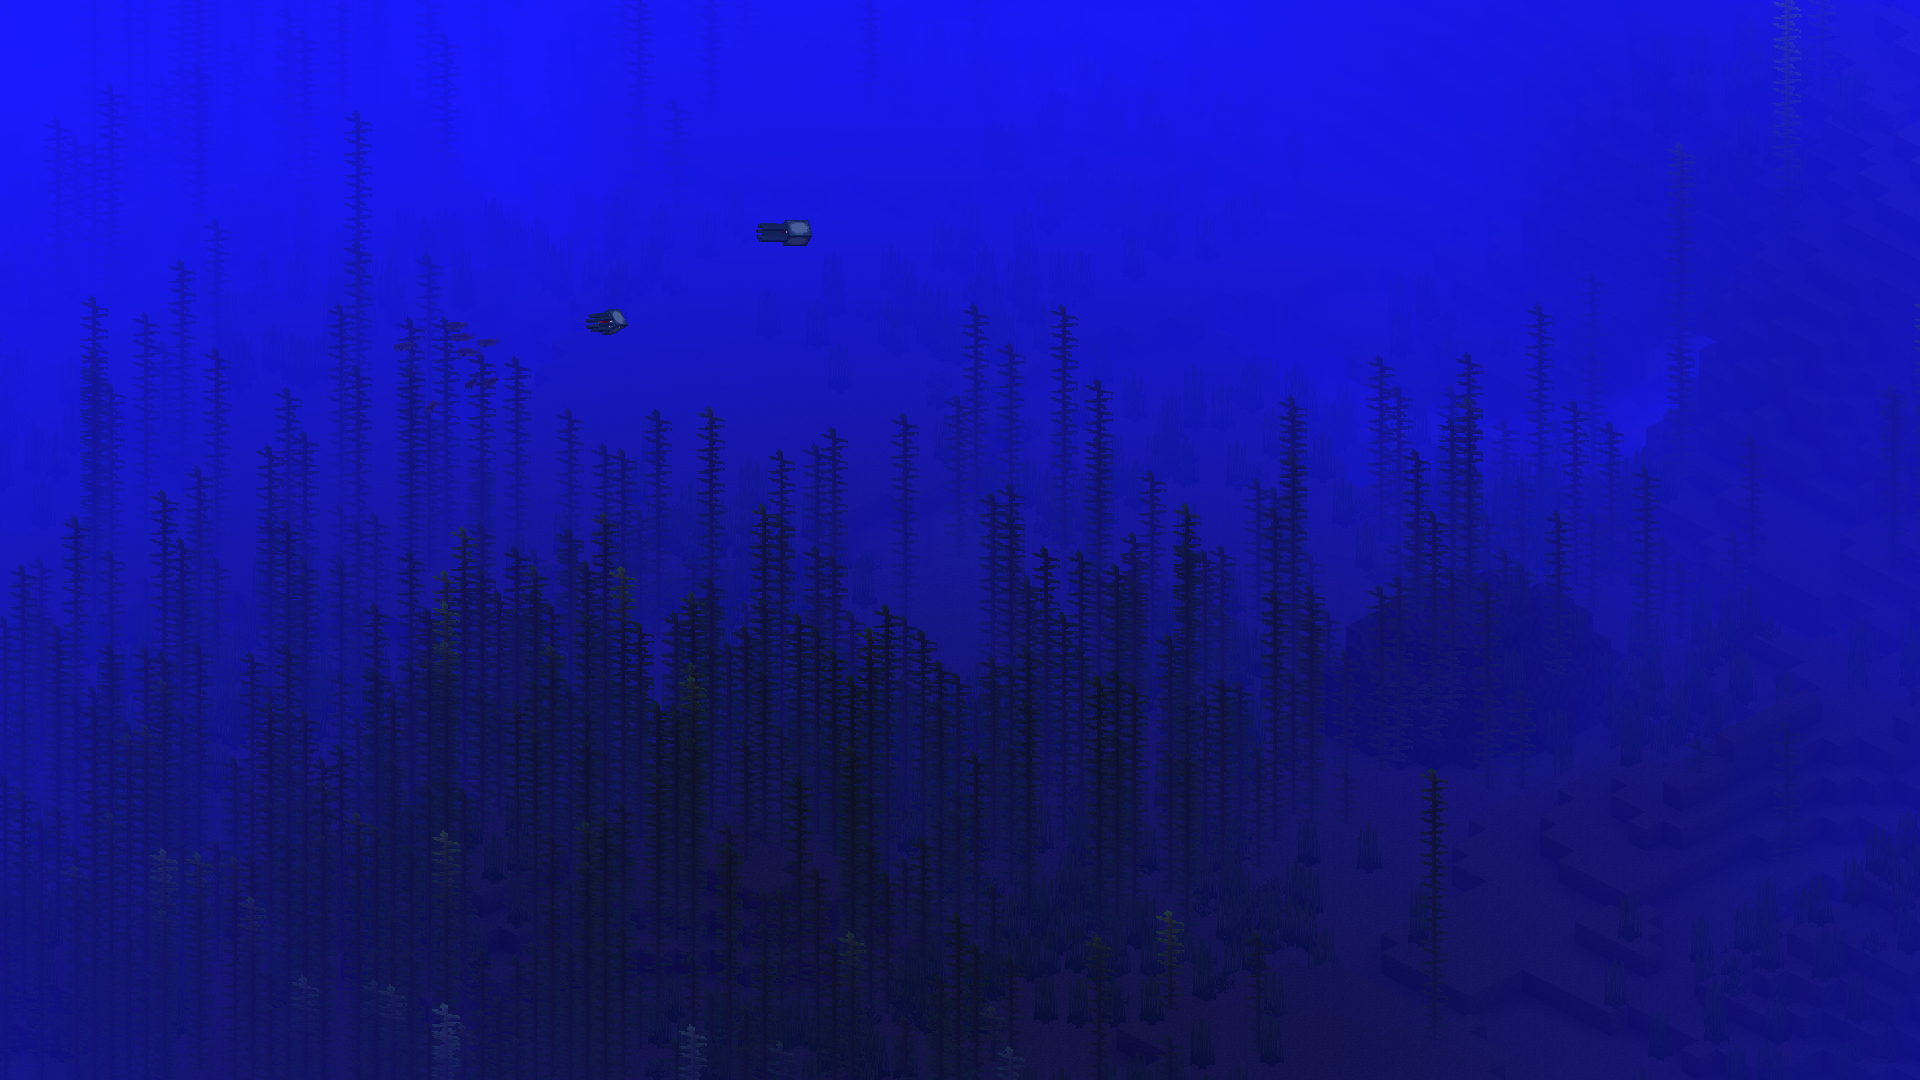 MINECRAFT, LE GUIDE OCEANS